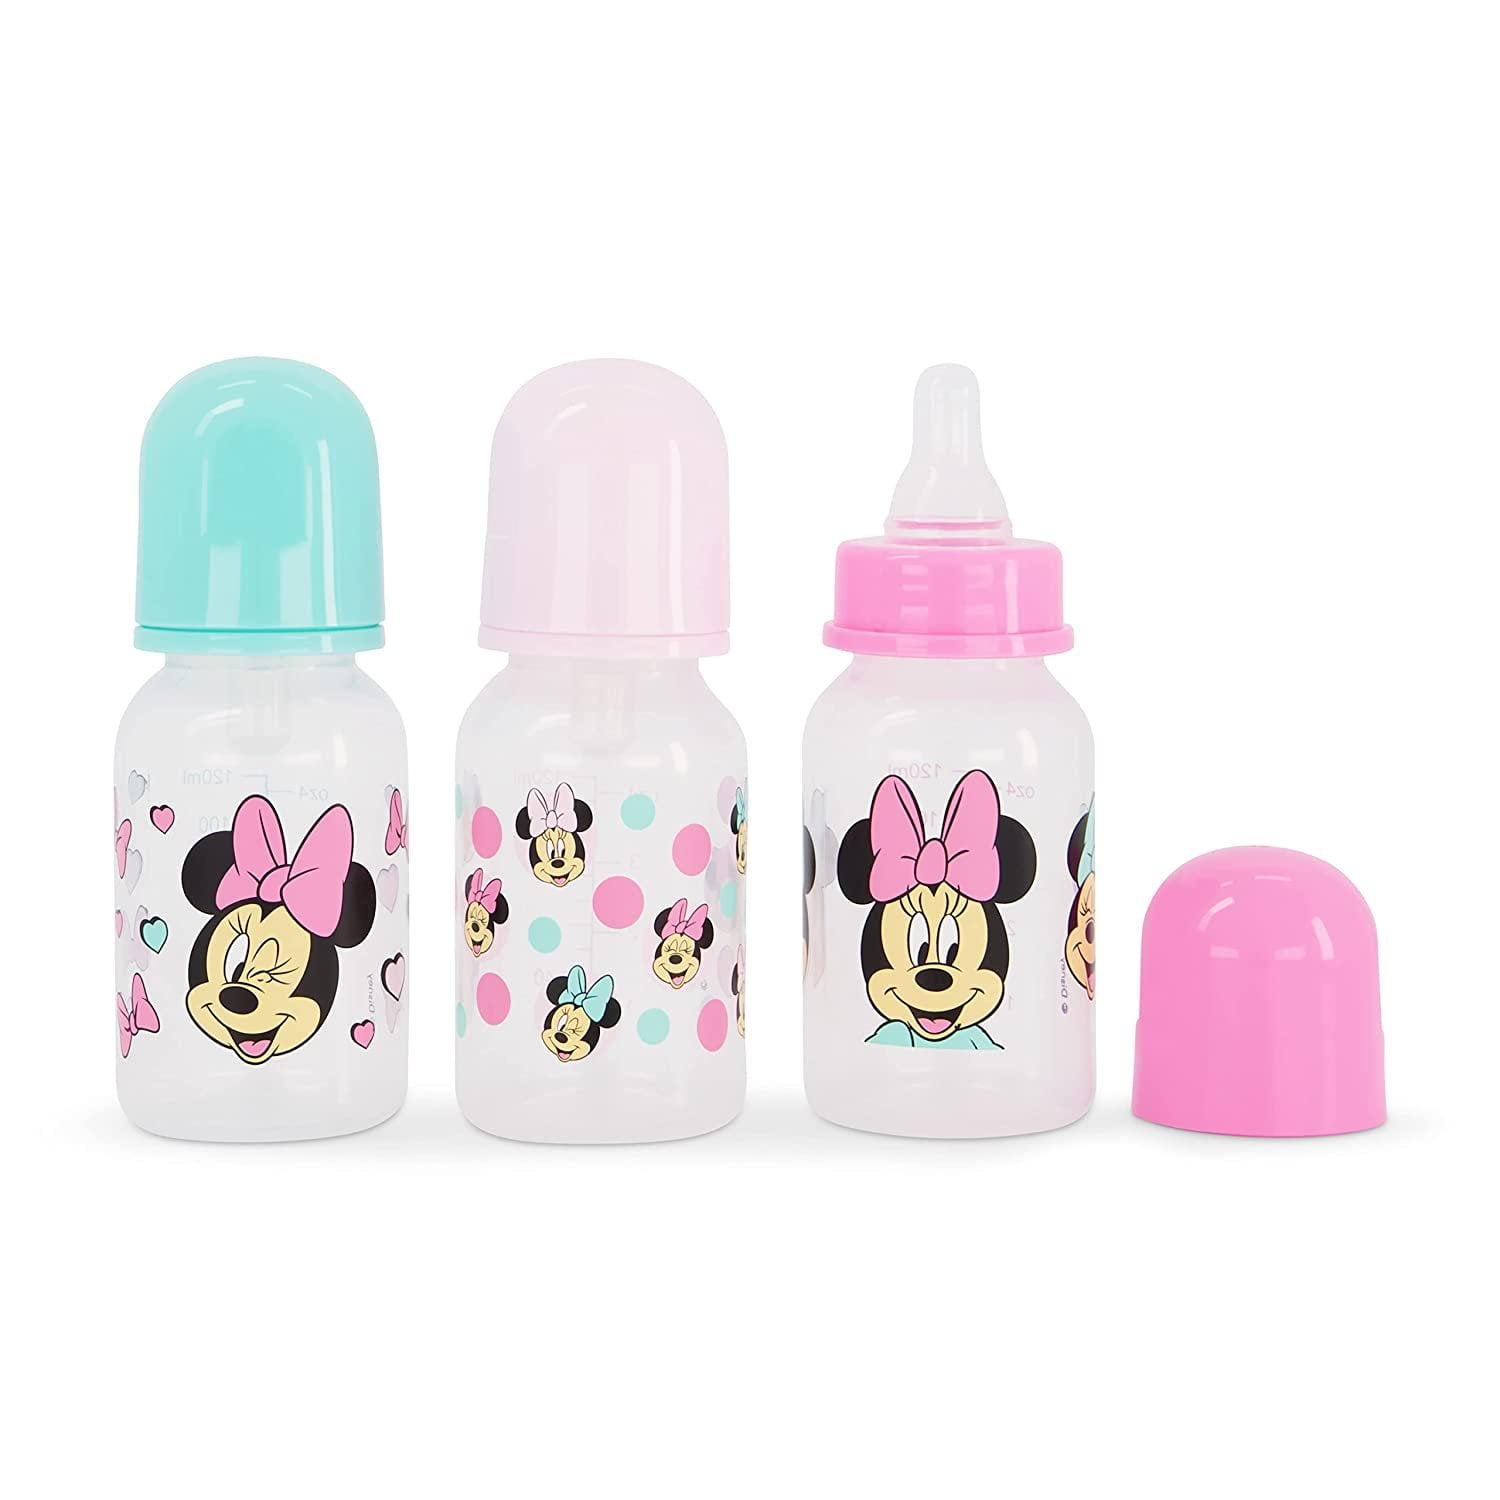 Baby Bottles 5 oz for Boys and Girls 3 Pack of DisneyMickey Starboy  Infant Bottles for Newborns and All Babies BPA-Free Plastic Baby Bottle for  Baby